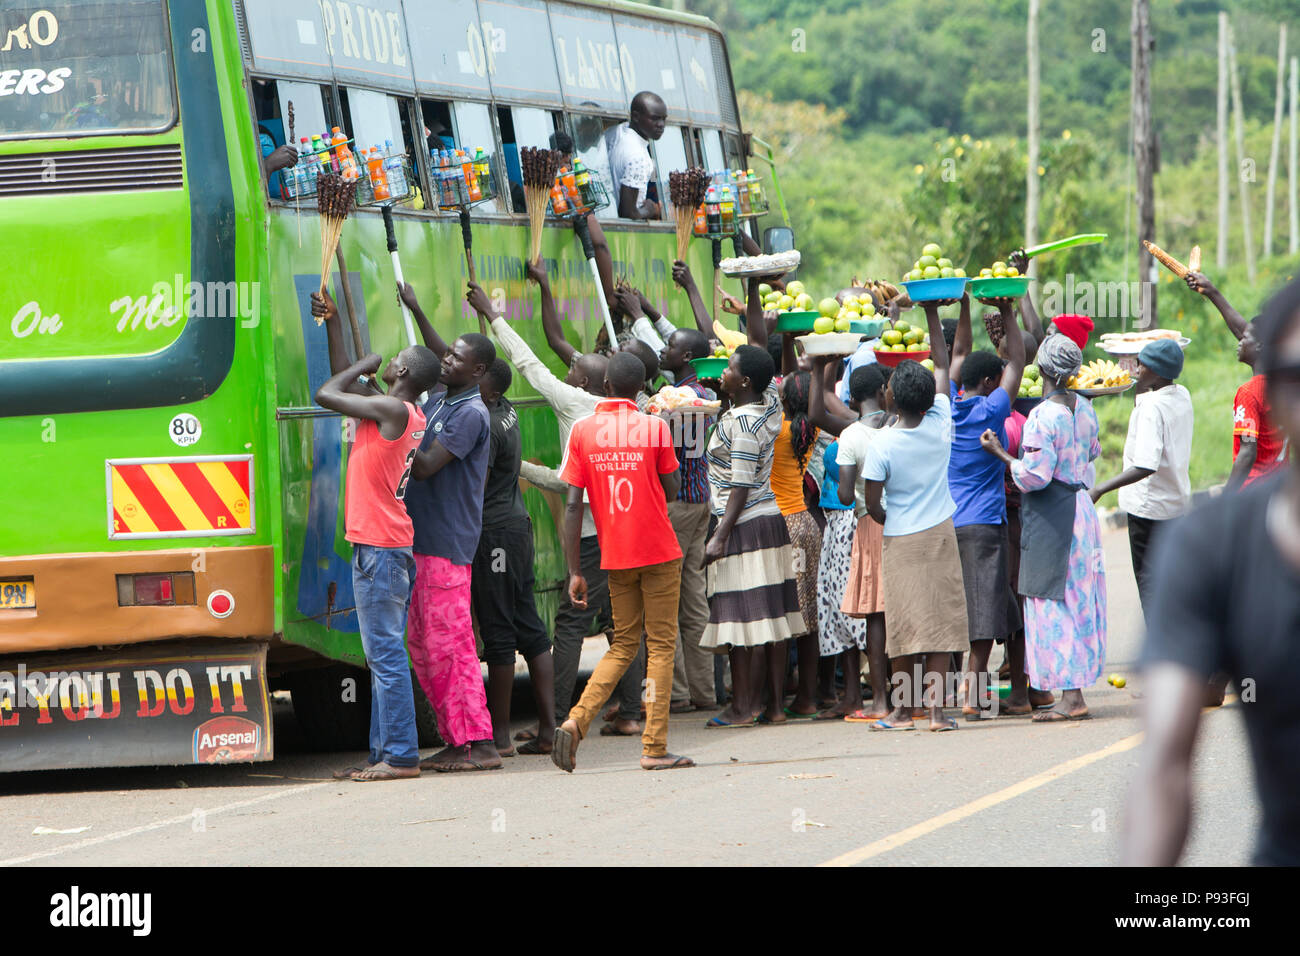 Kamdini, Uganda - At a bus stop, flying merchants offer travelers a commuter bus for sale. Stock Photo